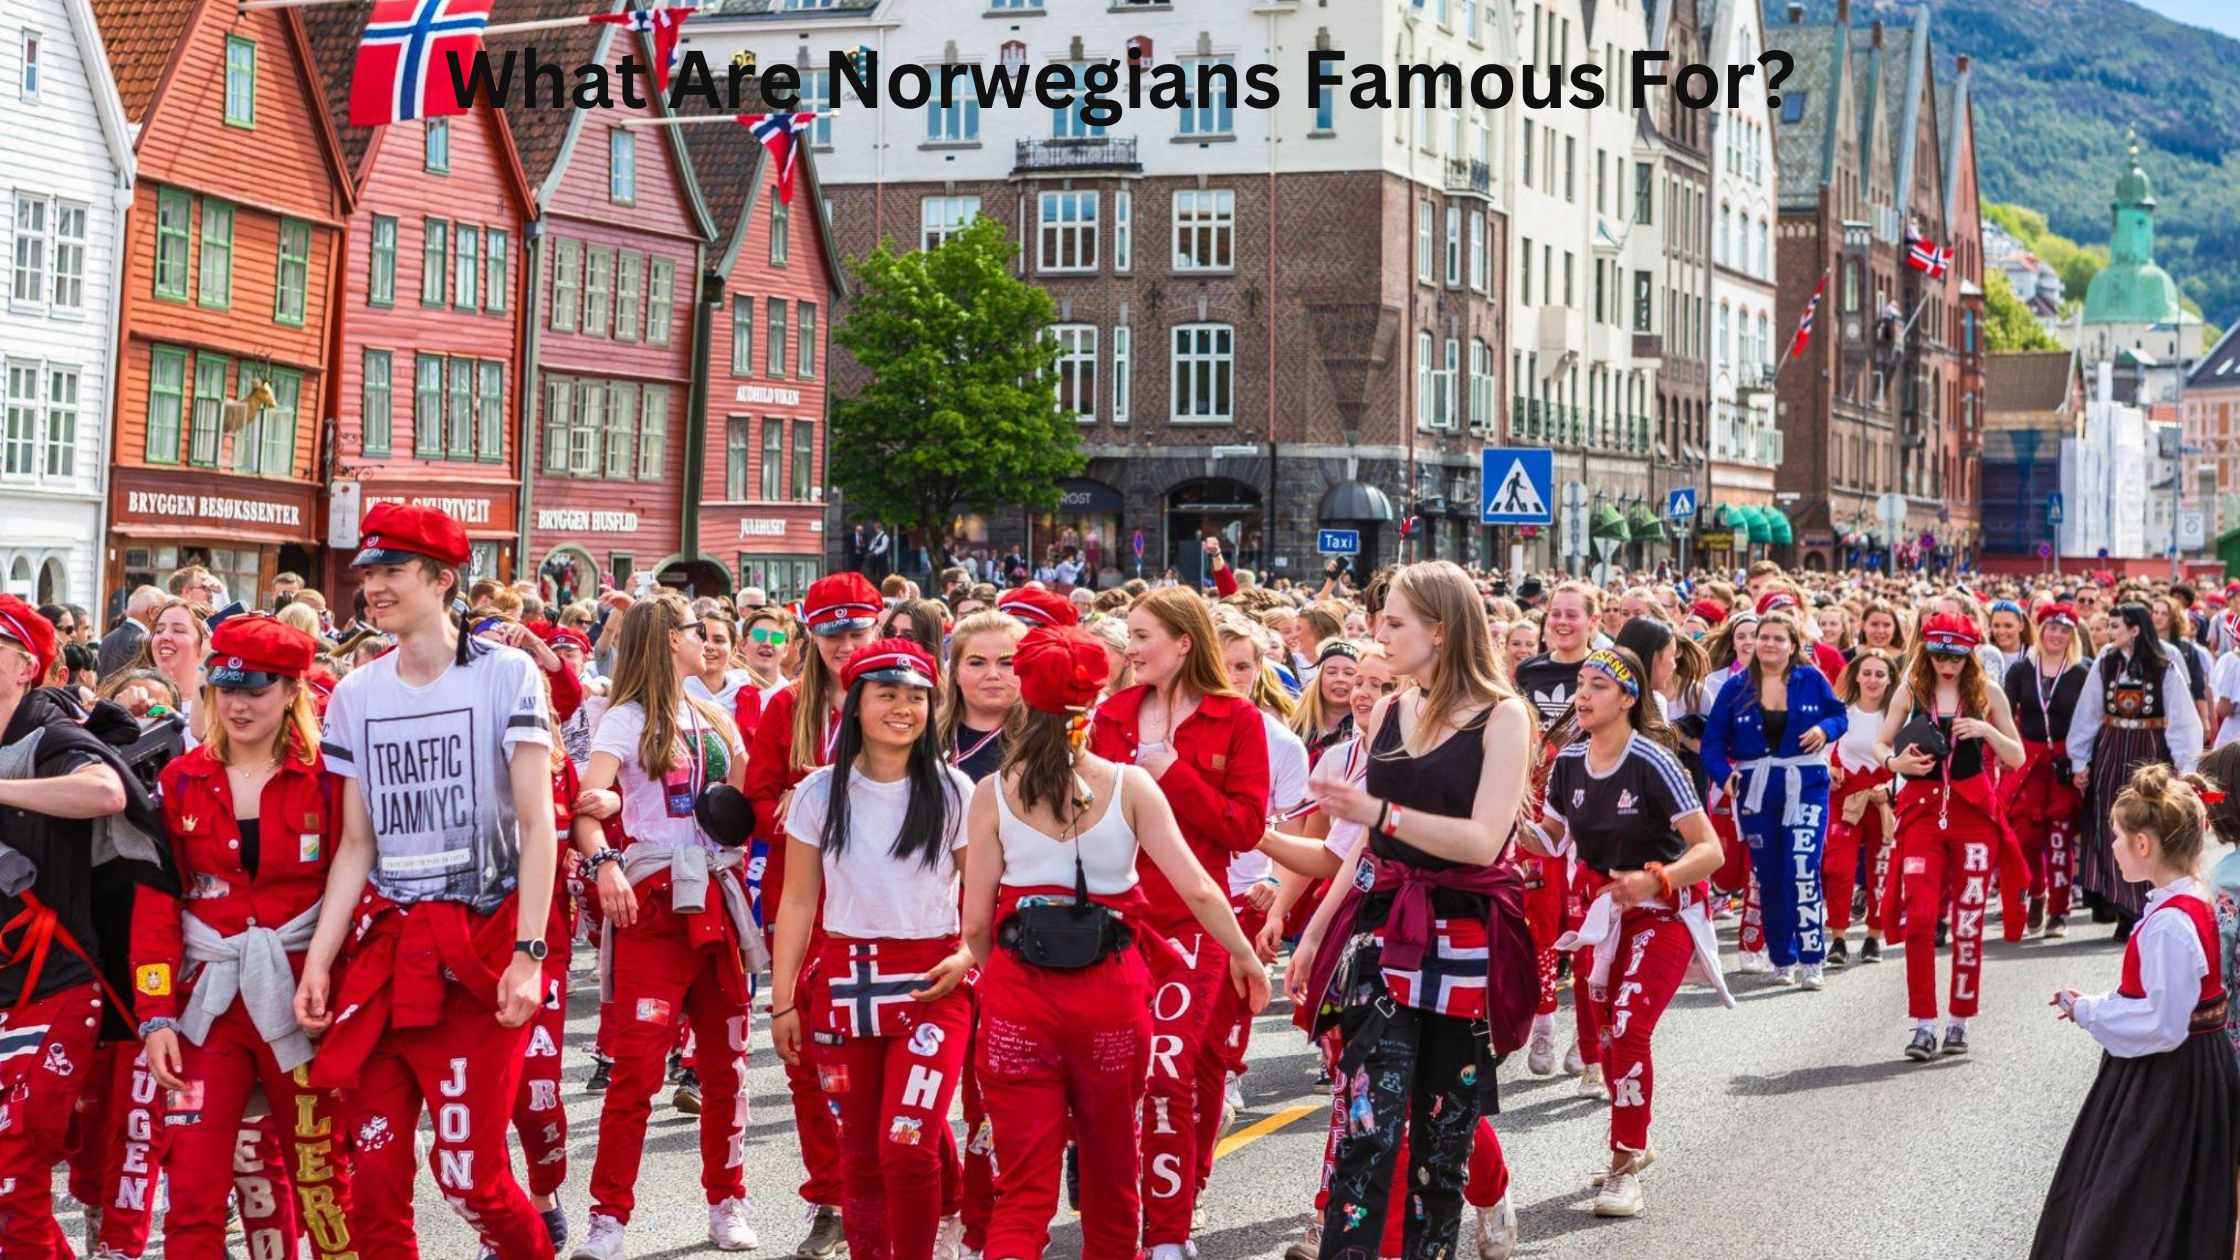 What Are Norwegians Famous For